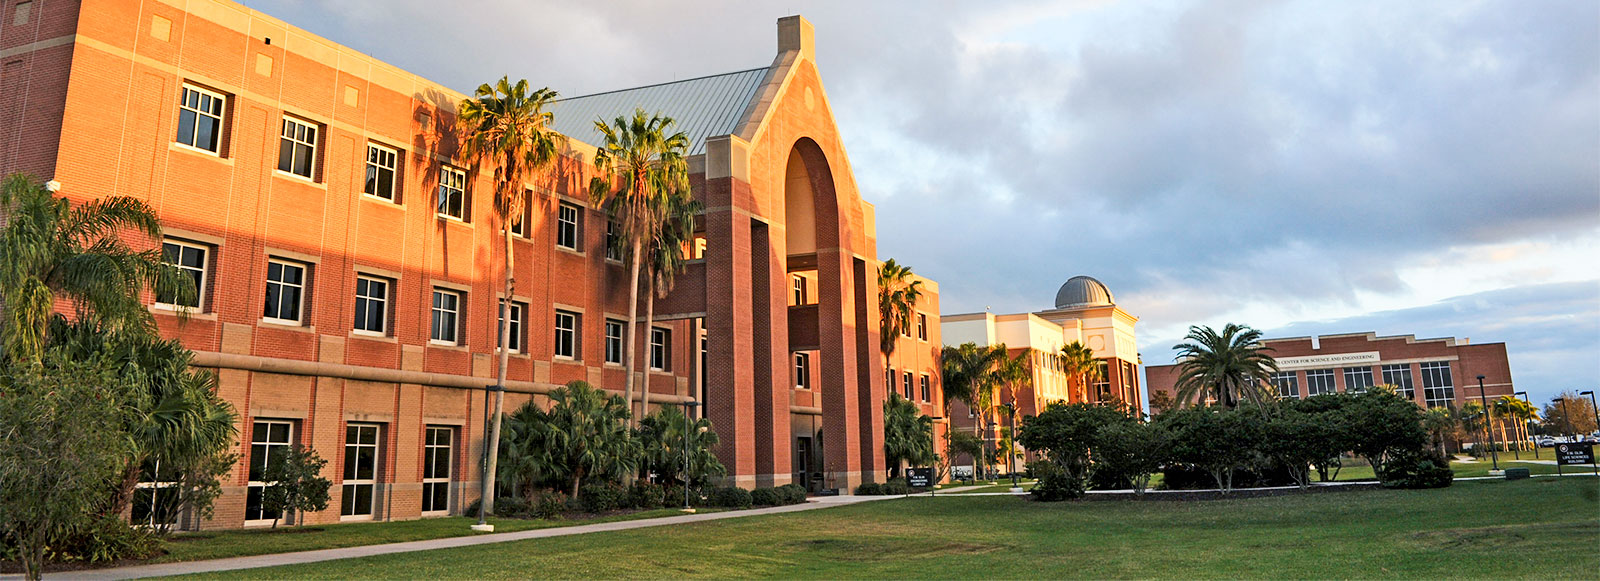 College of Engineering and Science > For Master's Students | Florida Tech